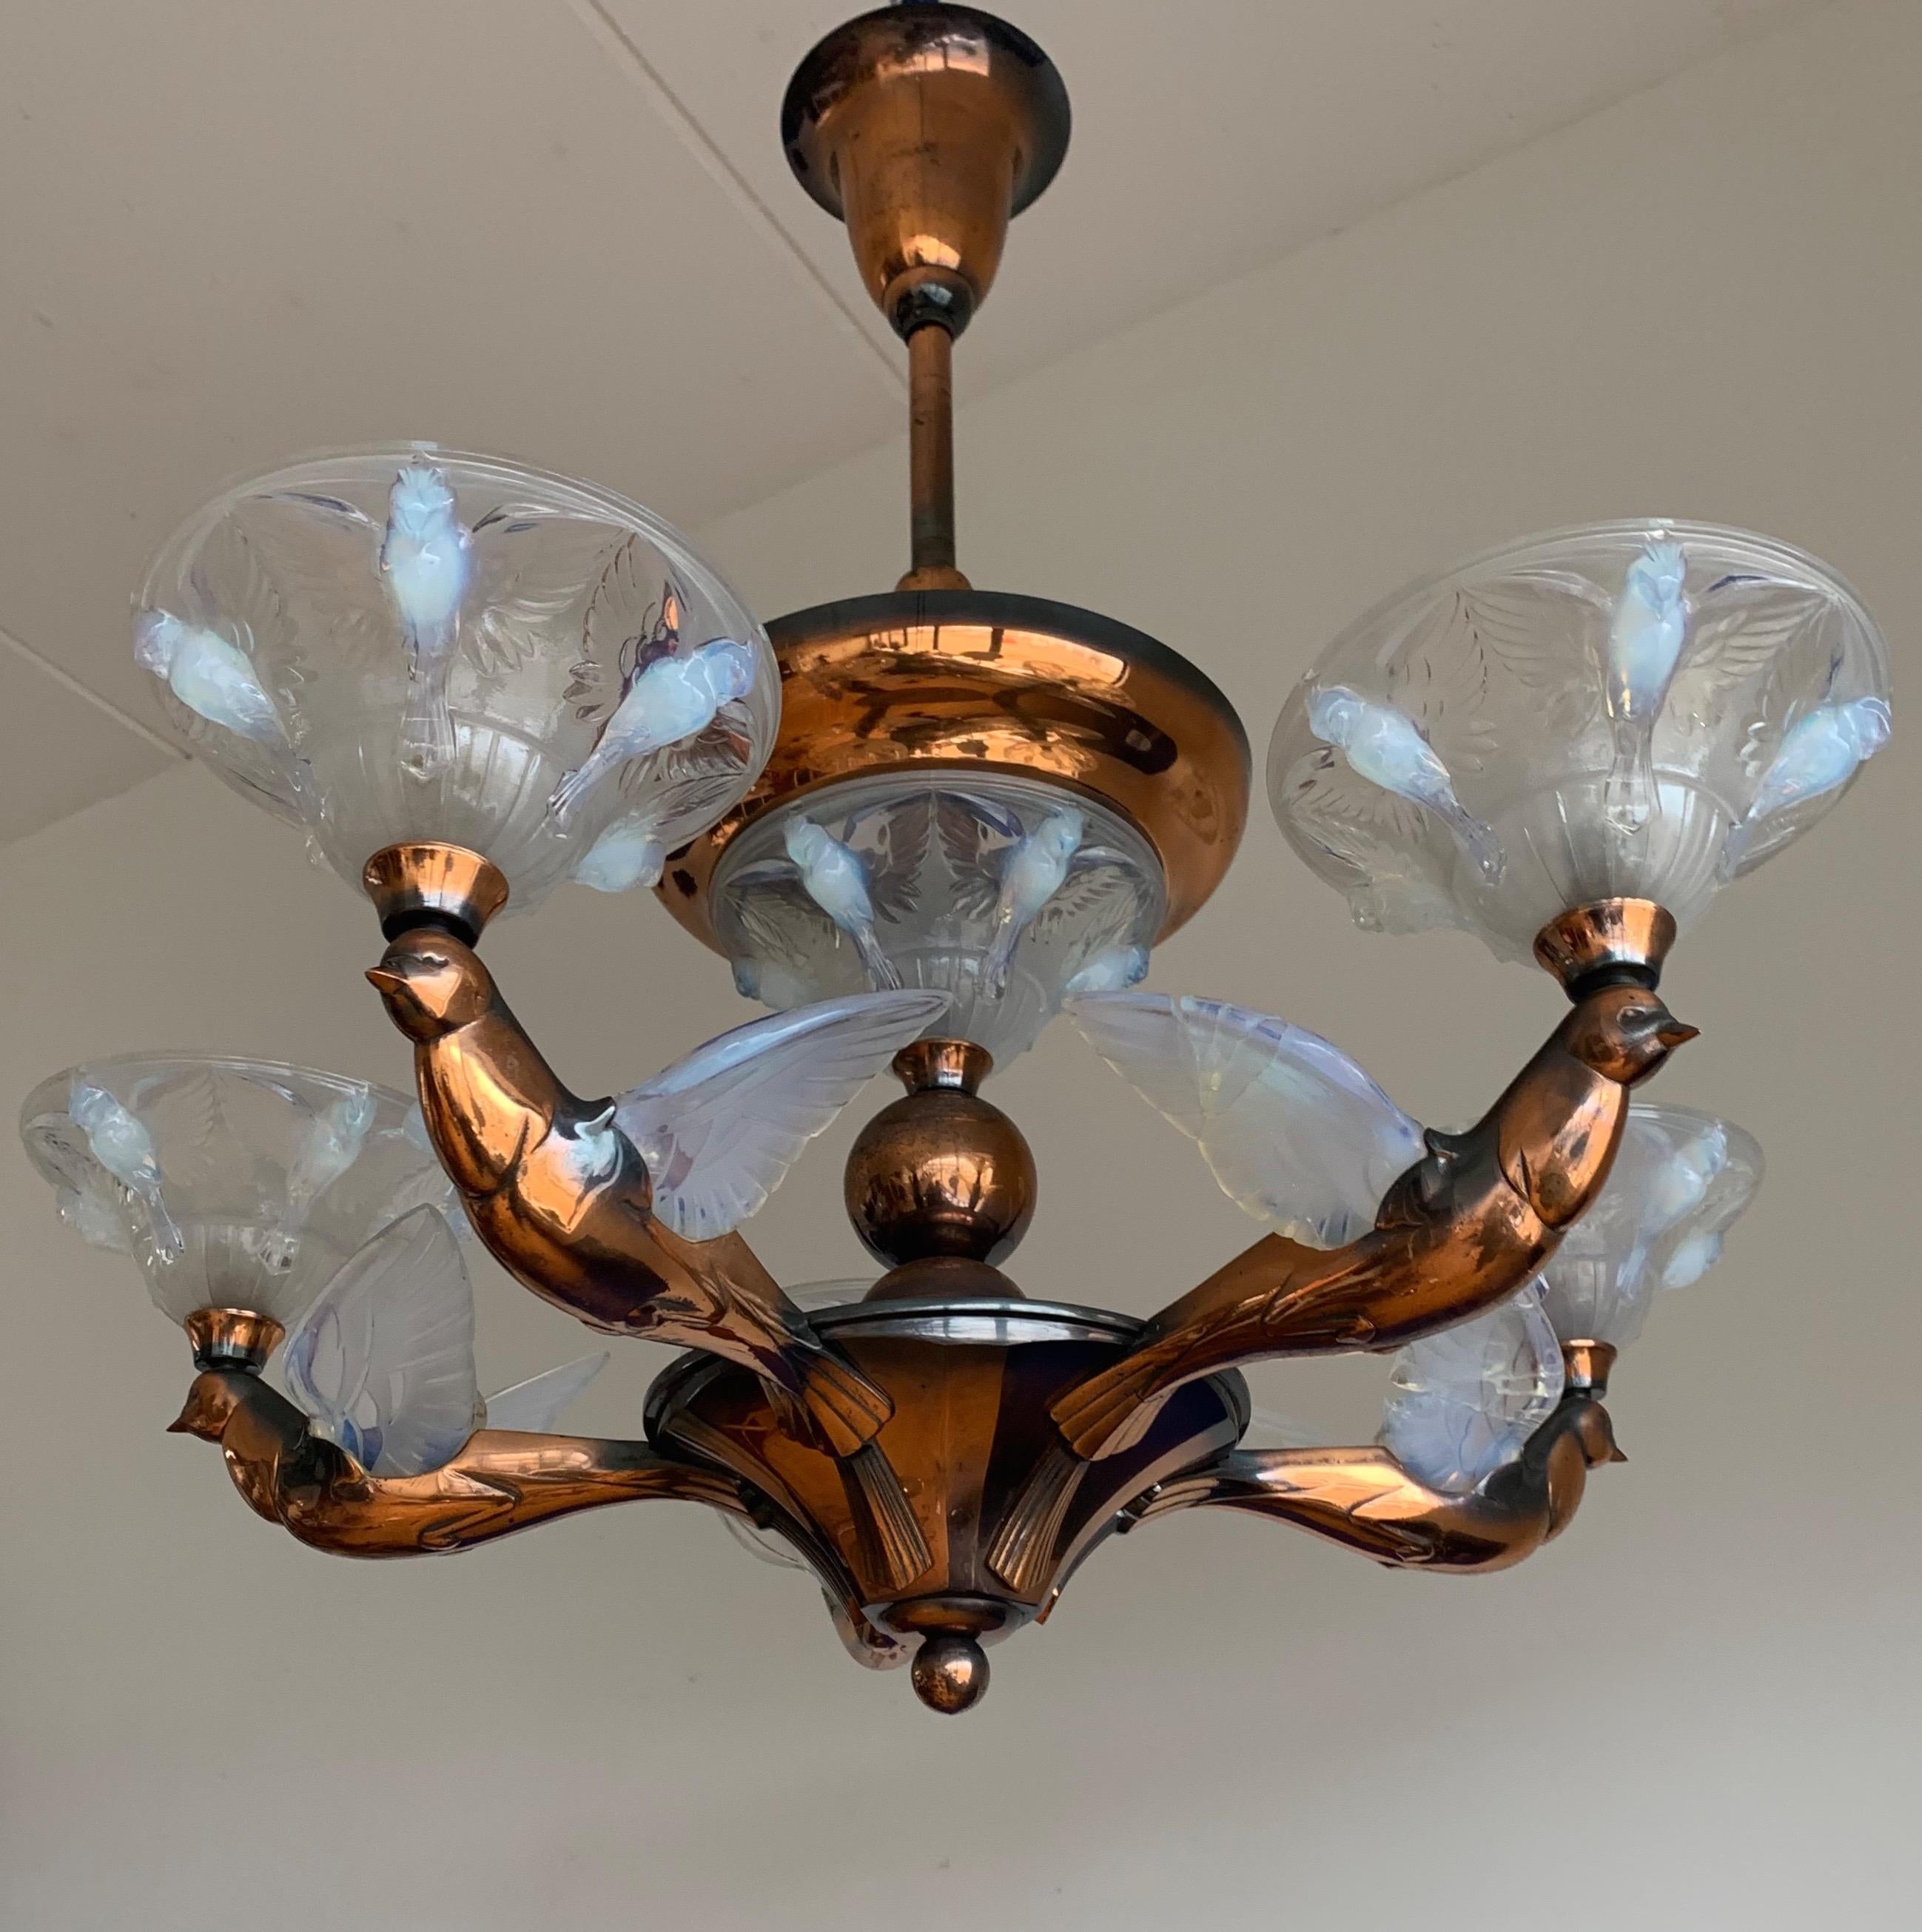 Very stylish and rare Art Deco pendant light with a beautiful patina.

When we first saw this rare, sizeable and highly decorative Art Deco pendant we immediately knew it had to become ours. The wonderful design and the beautiful materials